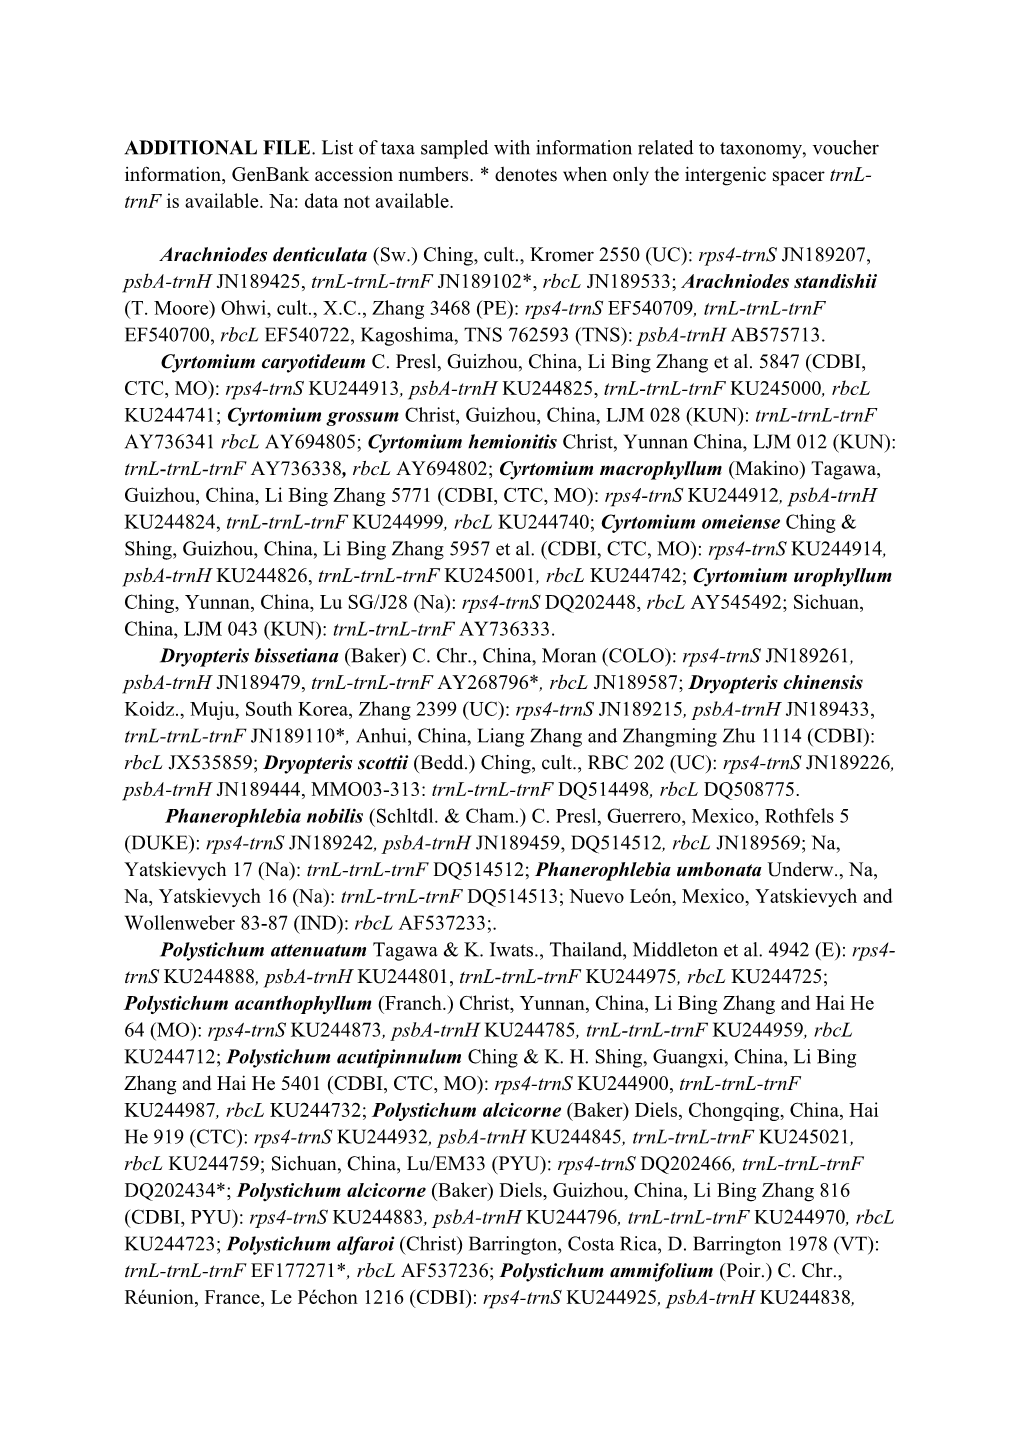 Additional File. List of Taxa Sampled with Information Related to Taxonomy, Voucher Information